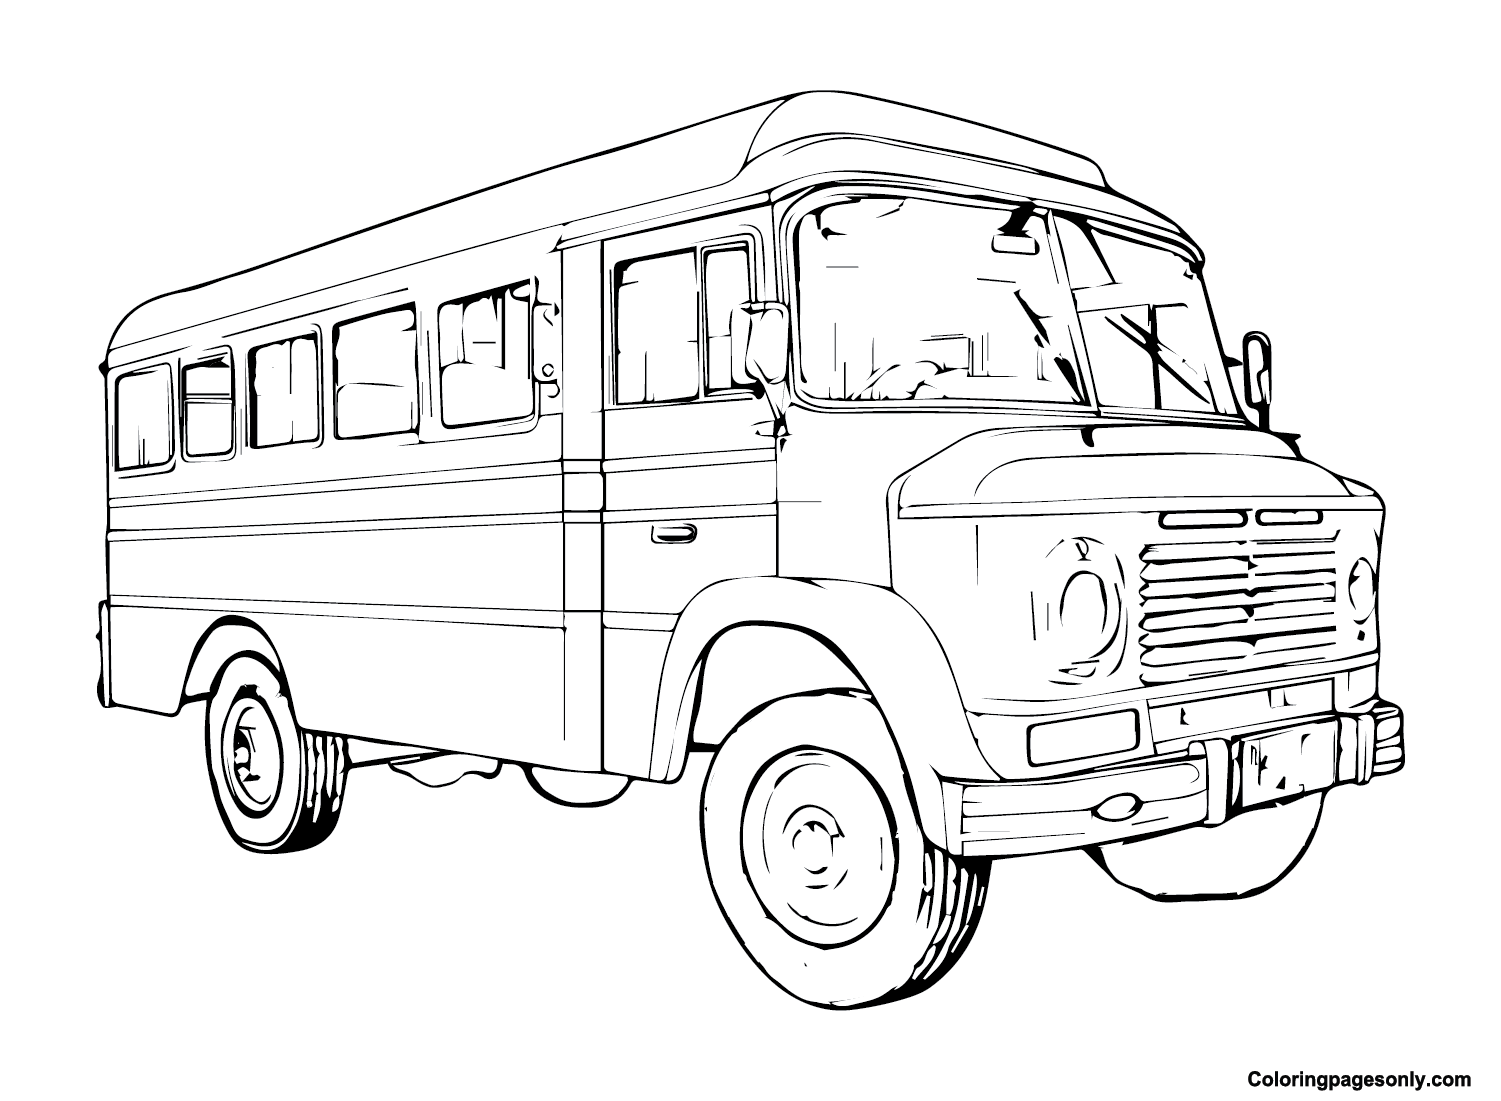 Jeepney color Sheets Coloring Page